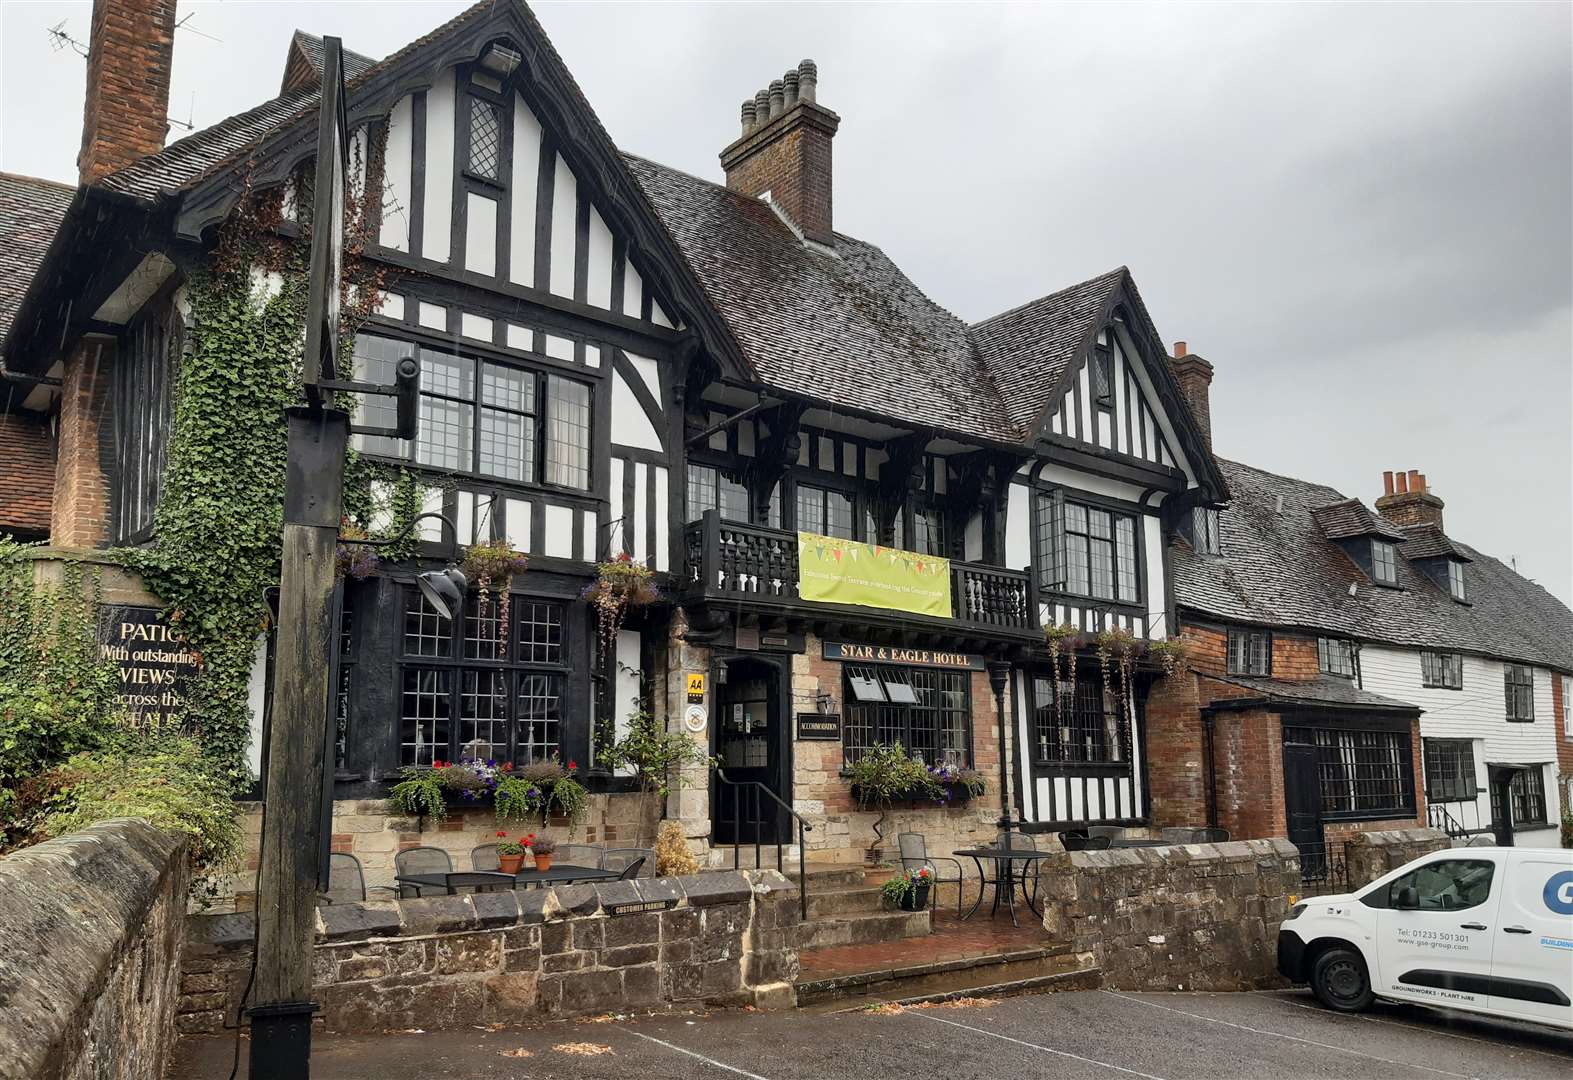 The Star and Eagel Hotel in Goudhurst is located on the bend of Church Road